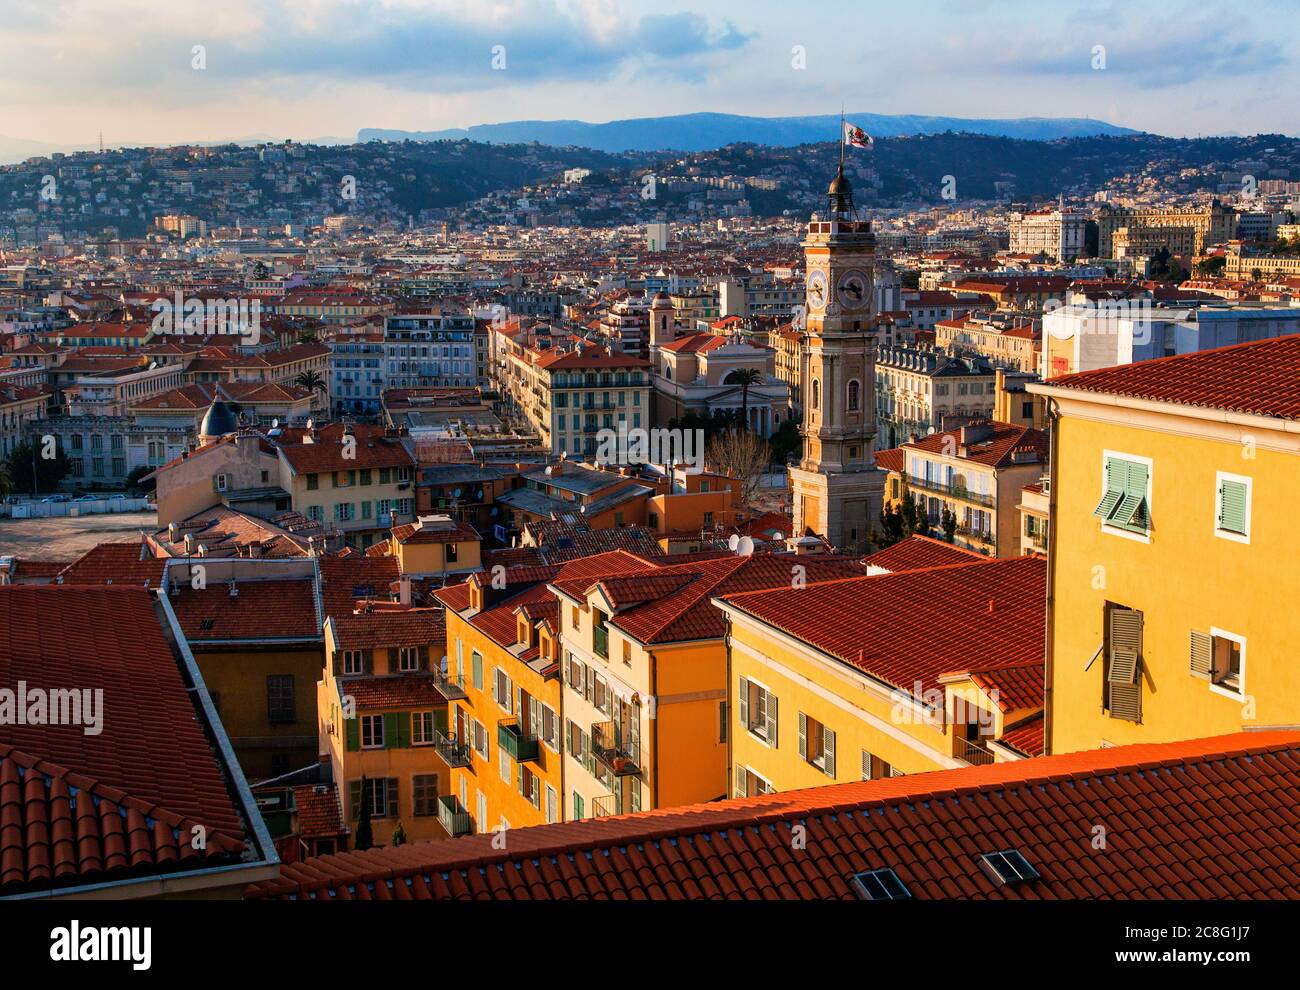 geography / travel, France, Provence-Alpes-Cote d'Azur, Layers of architectural styles reveal the age of Nice, a popular F, No-Tourism-Advertising-Use Stock Photo